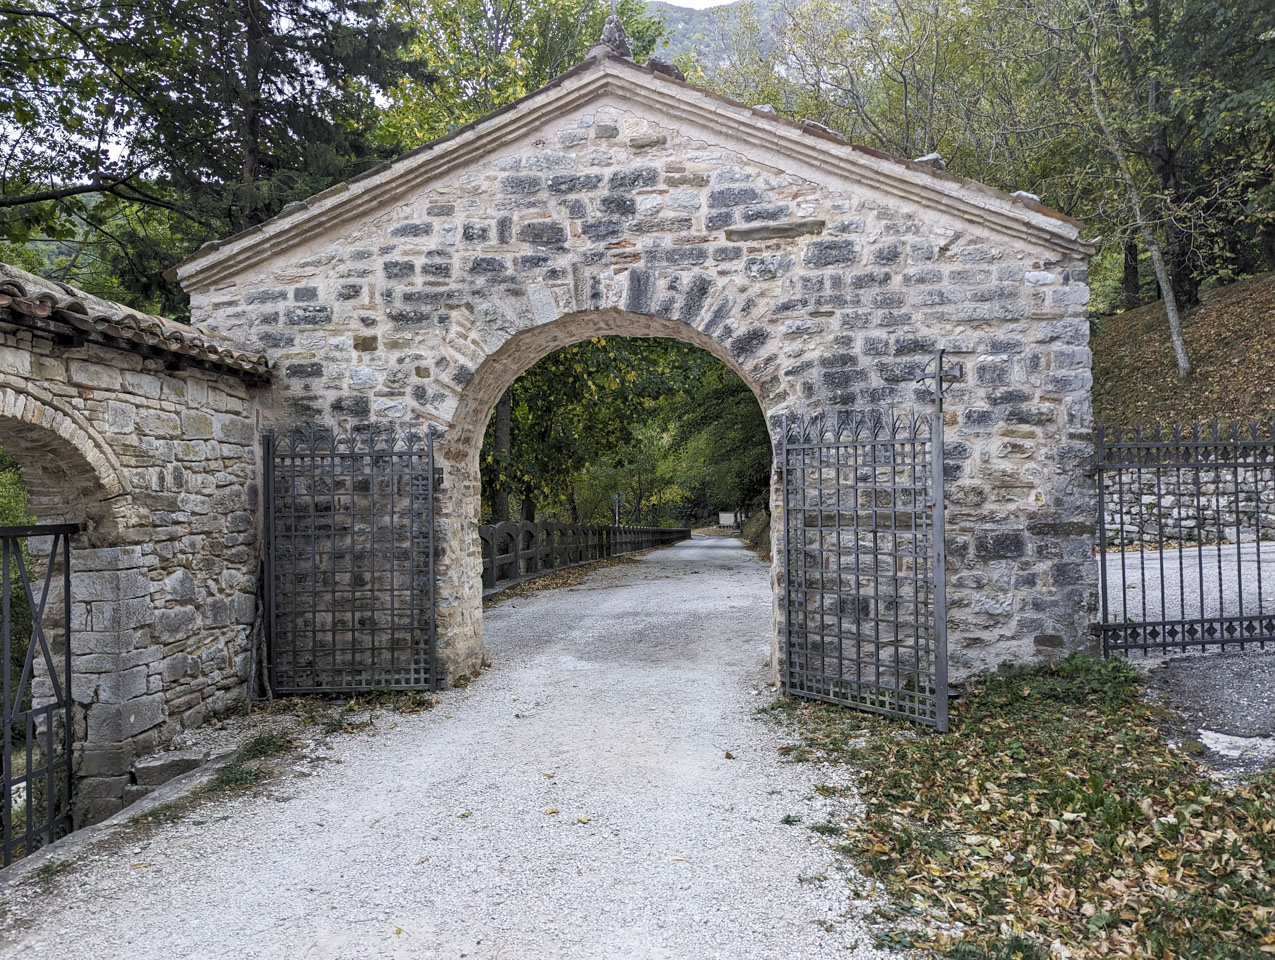 gated entrance to the monastery grounds